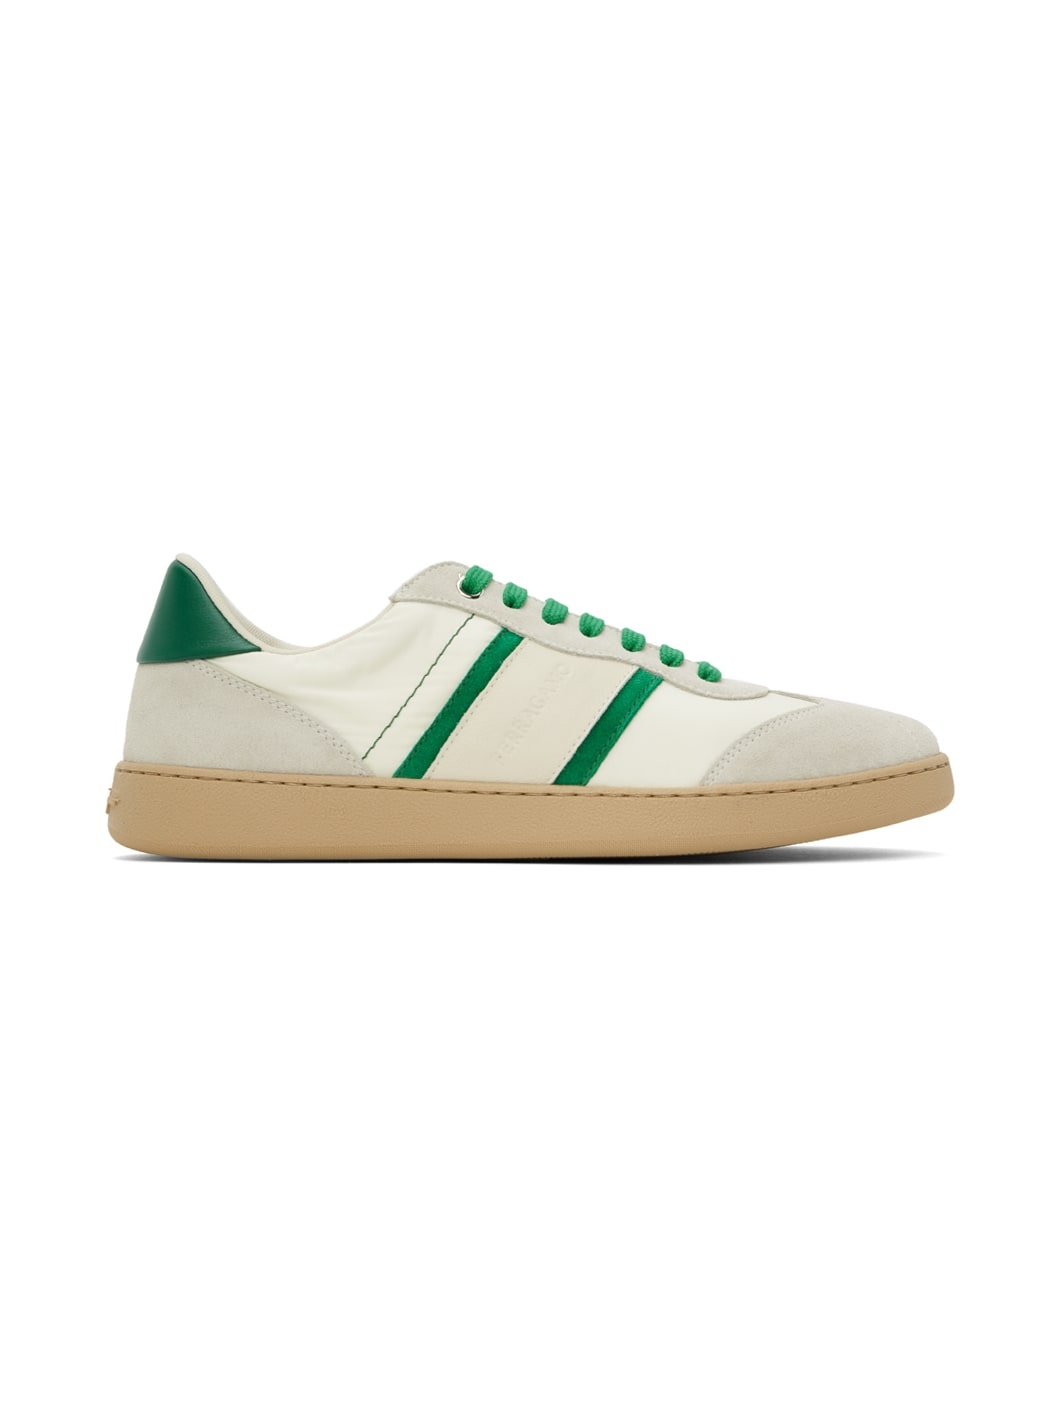 Off-White & Green Signature Low Sneakers - 1